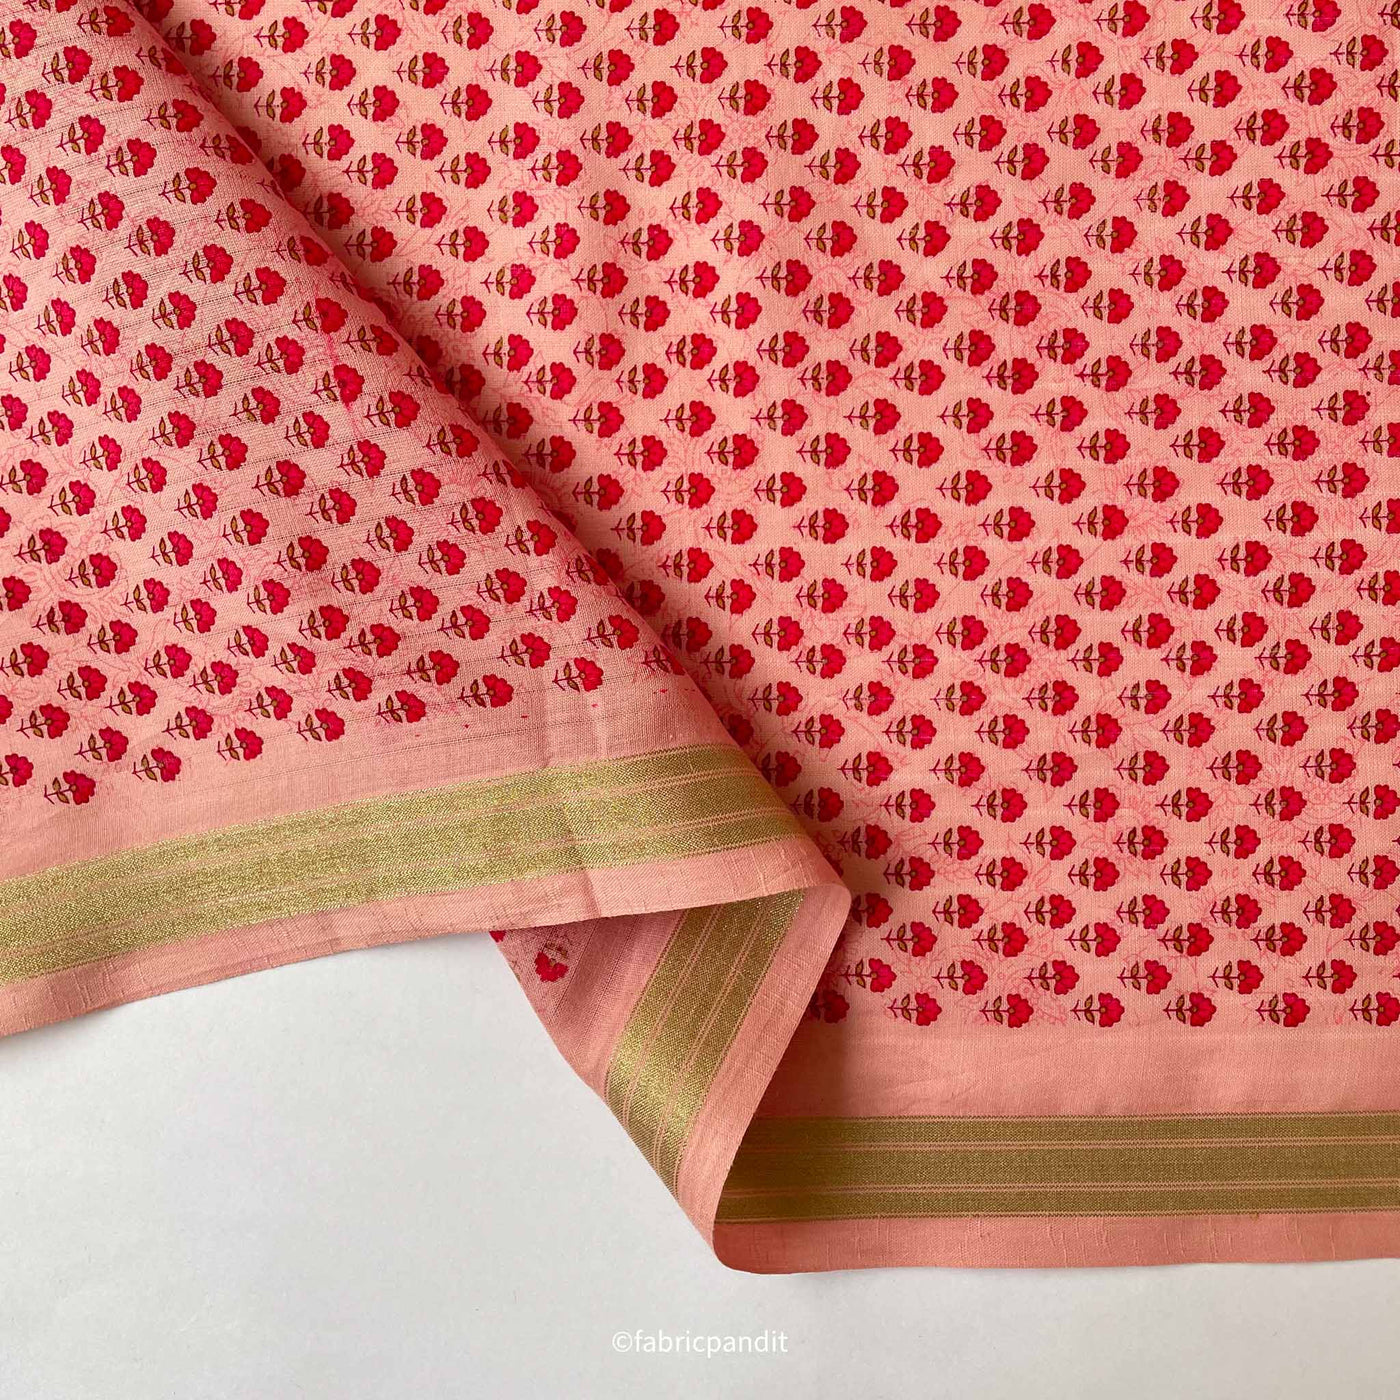 Fabric Pandit Fabric Soft Peach and Red Mini Marigolds Hand Block Printed Pure Cotton Denting Fabric